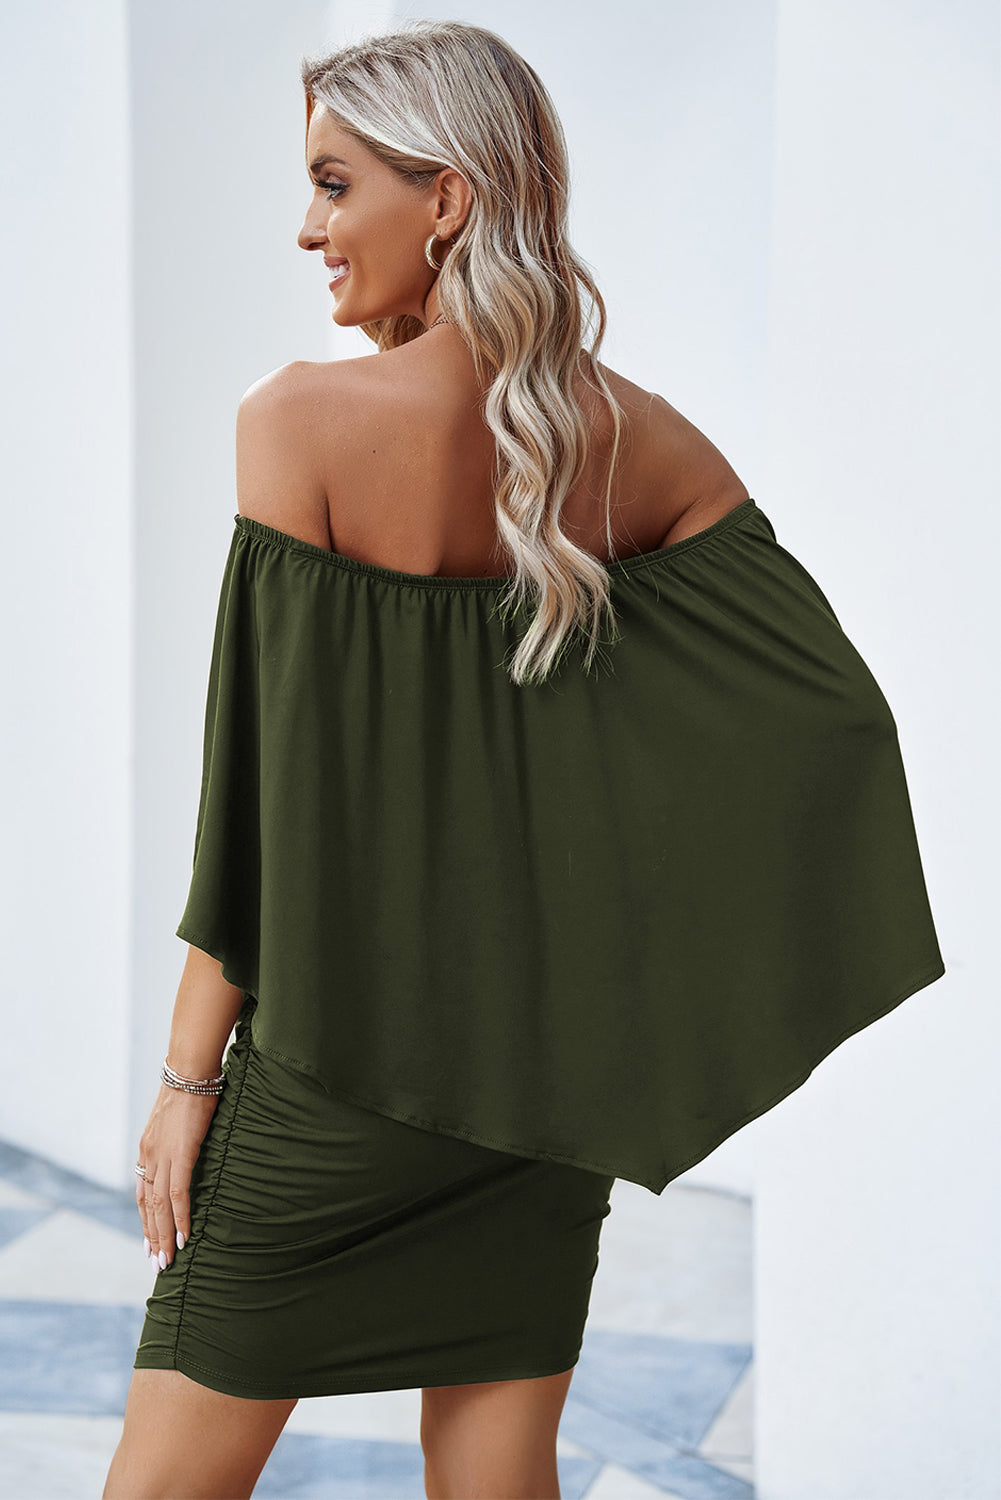 Analise Cloak Style Off-Shoulder Layered Dress Small-3XL